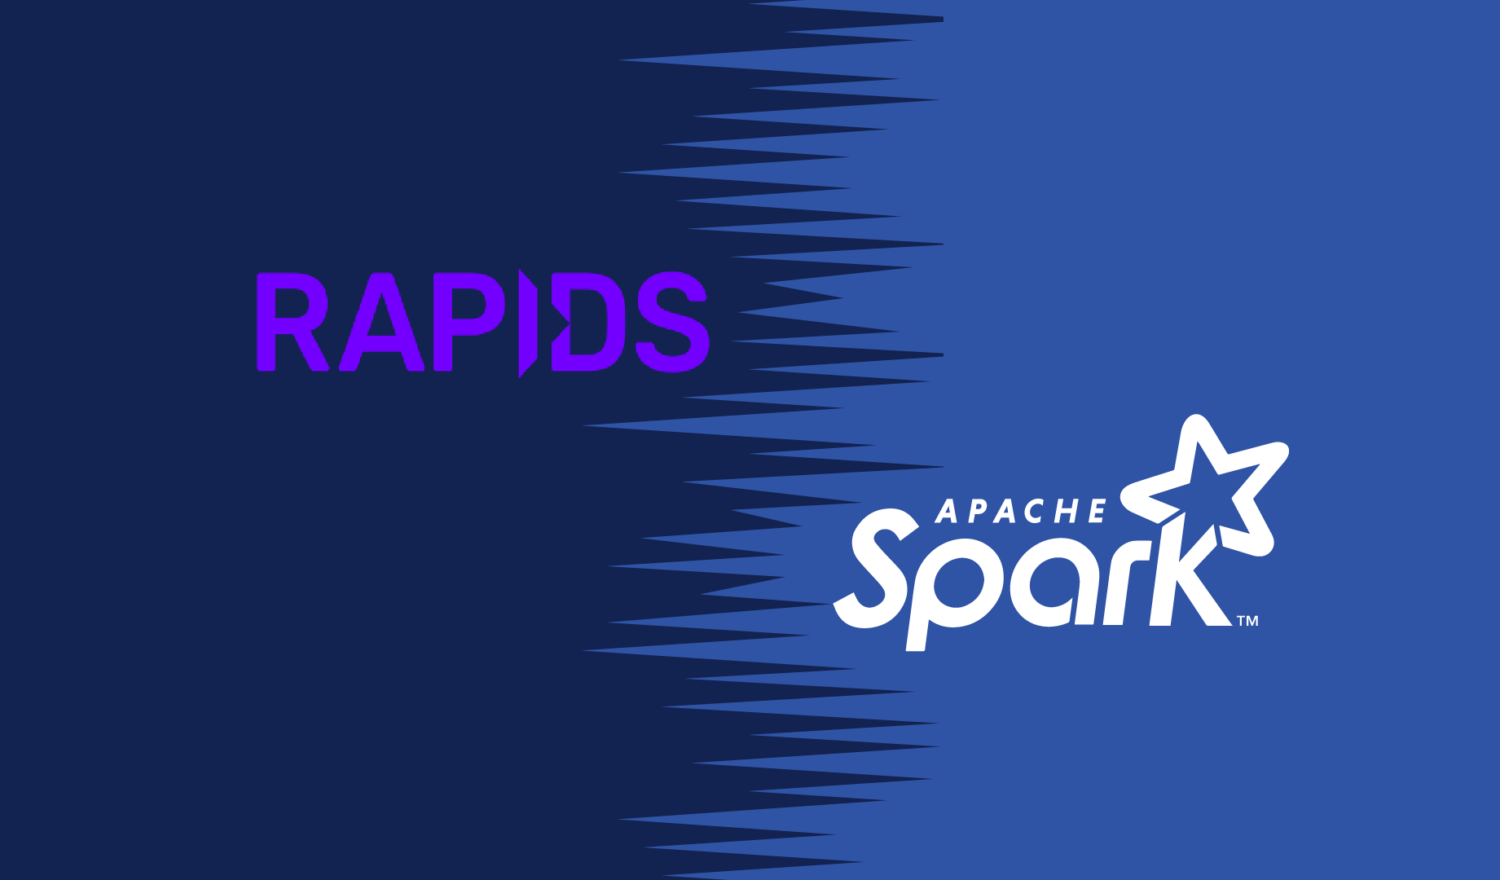 Rapids and Spark Logo an blue background